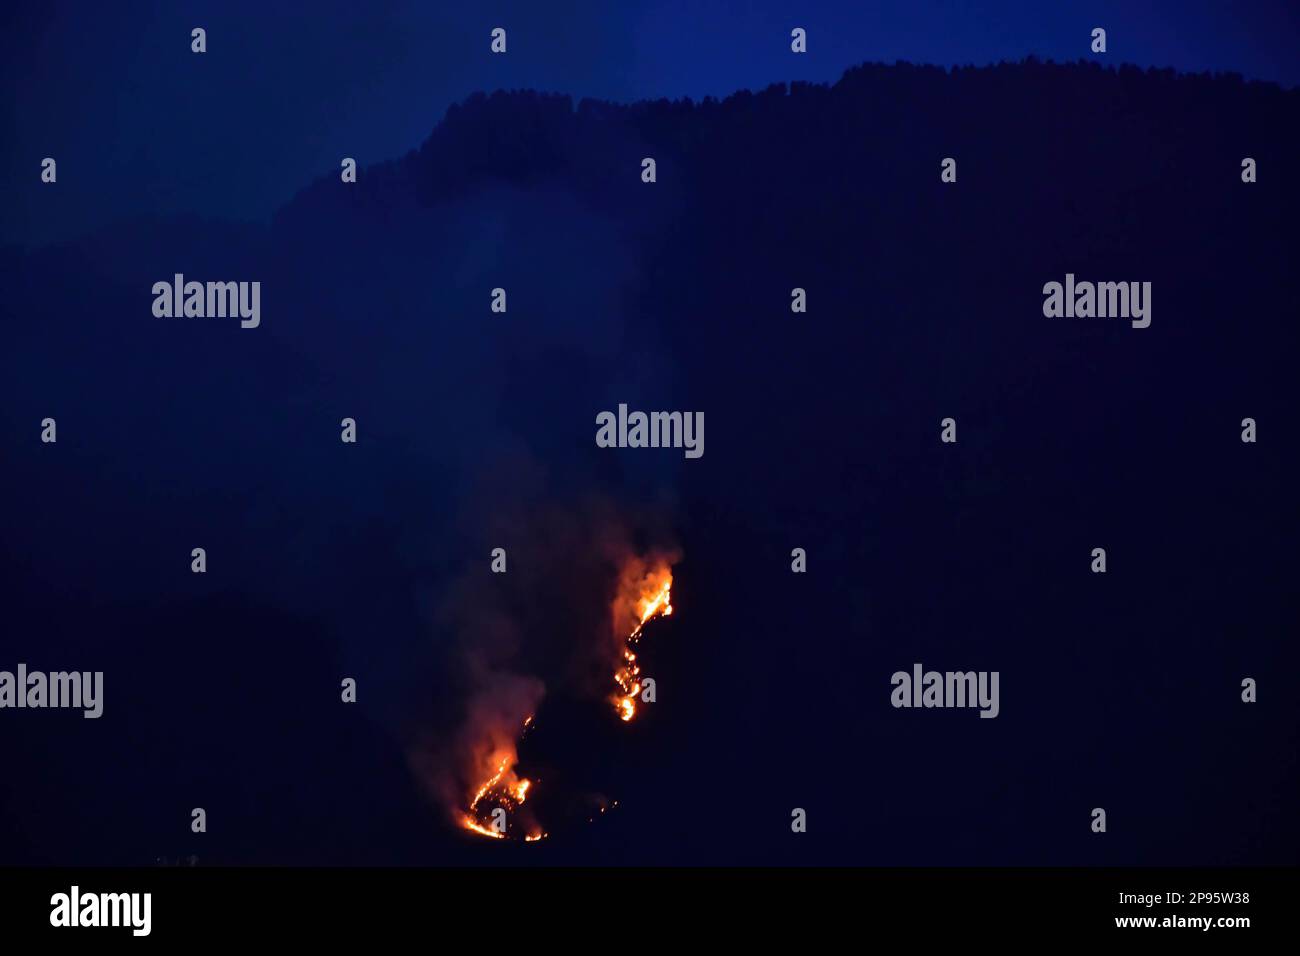 Flames and smoke rise from the Zabarwan hills during a forest fire in Srinagar. Stock Photo